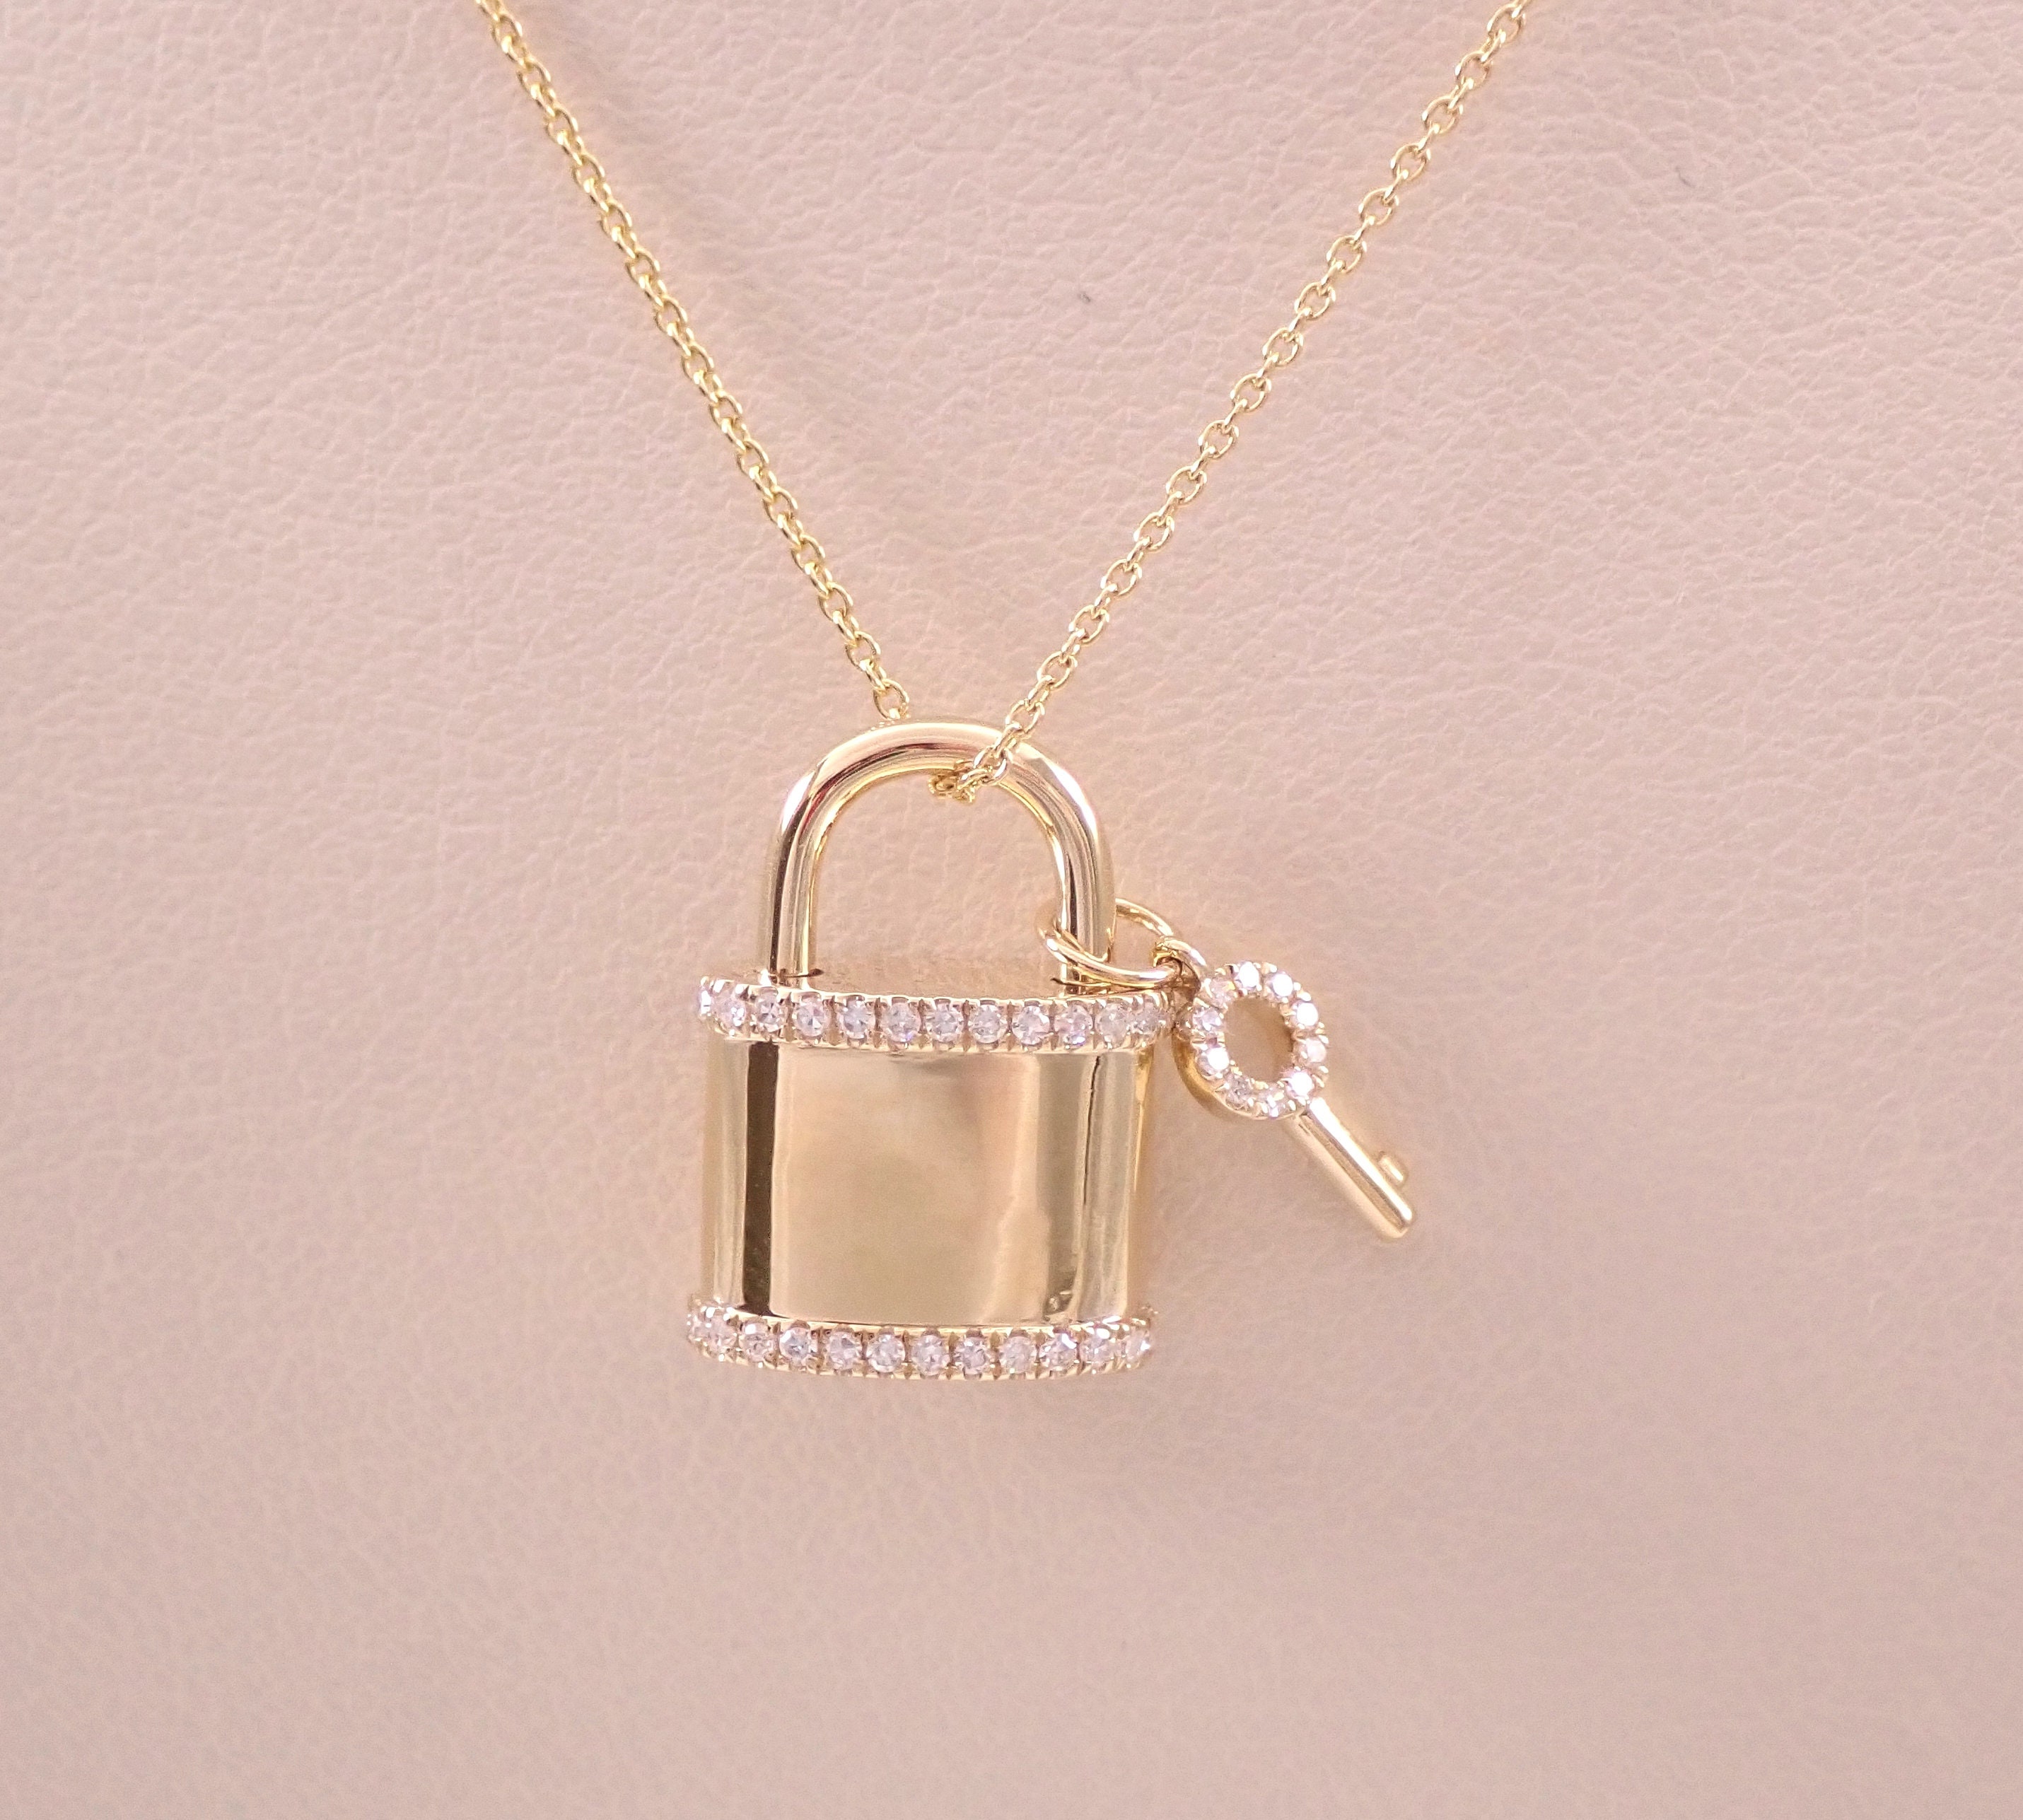 14K Padlock Necklace 18 Necklace with Pendant